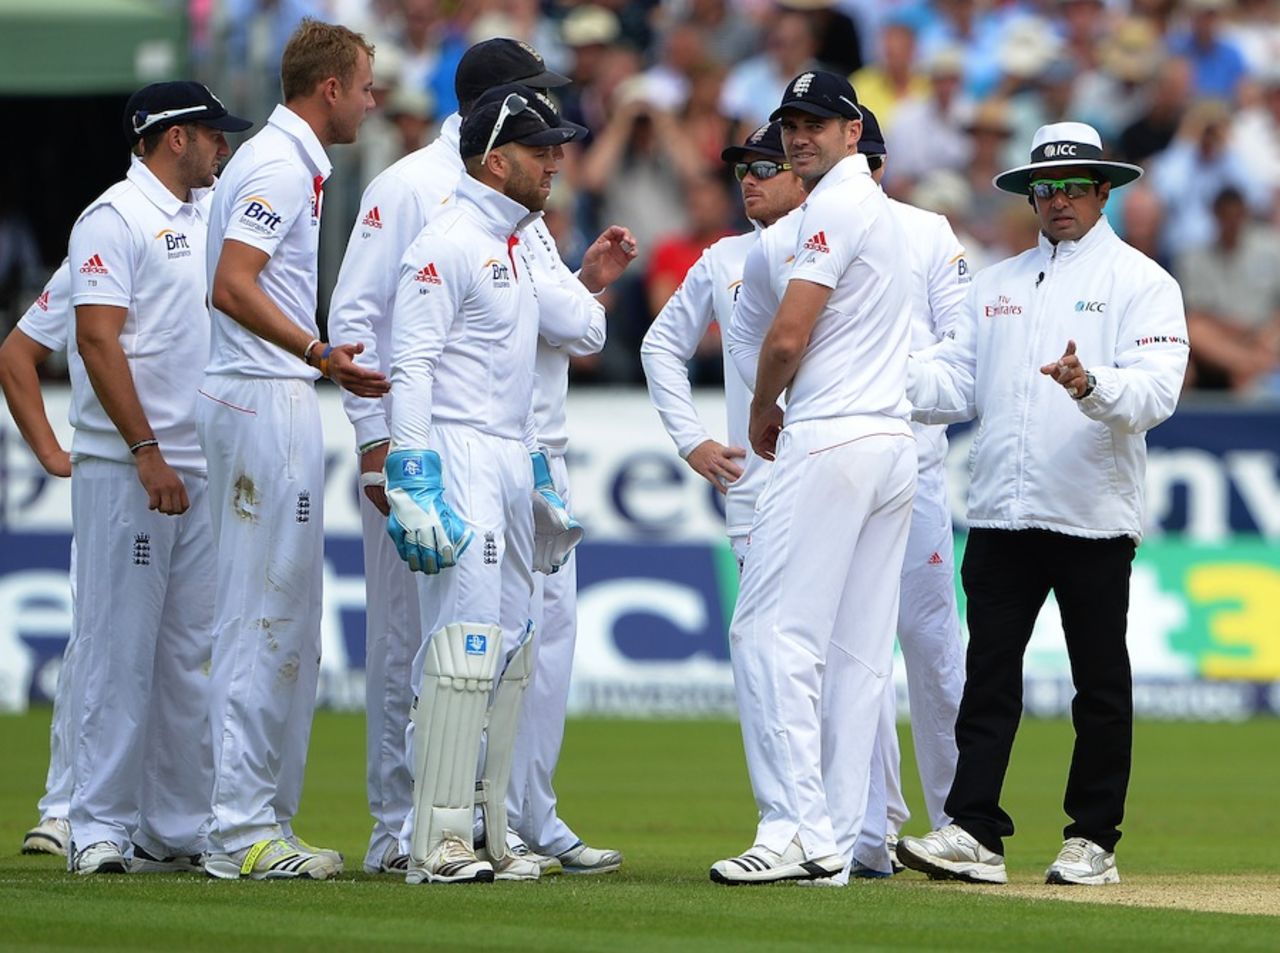 England players speak to Aleem Dar after a review adjudged Chris Rogers not out, England v Australia, 4th Investec Ashes Test, 2nd day, Chester-le-Street, August 10, 2013